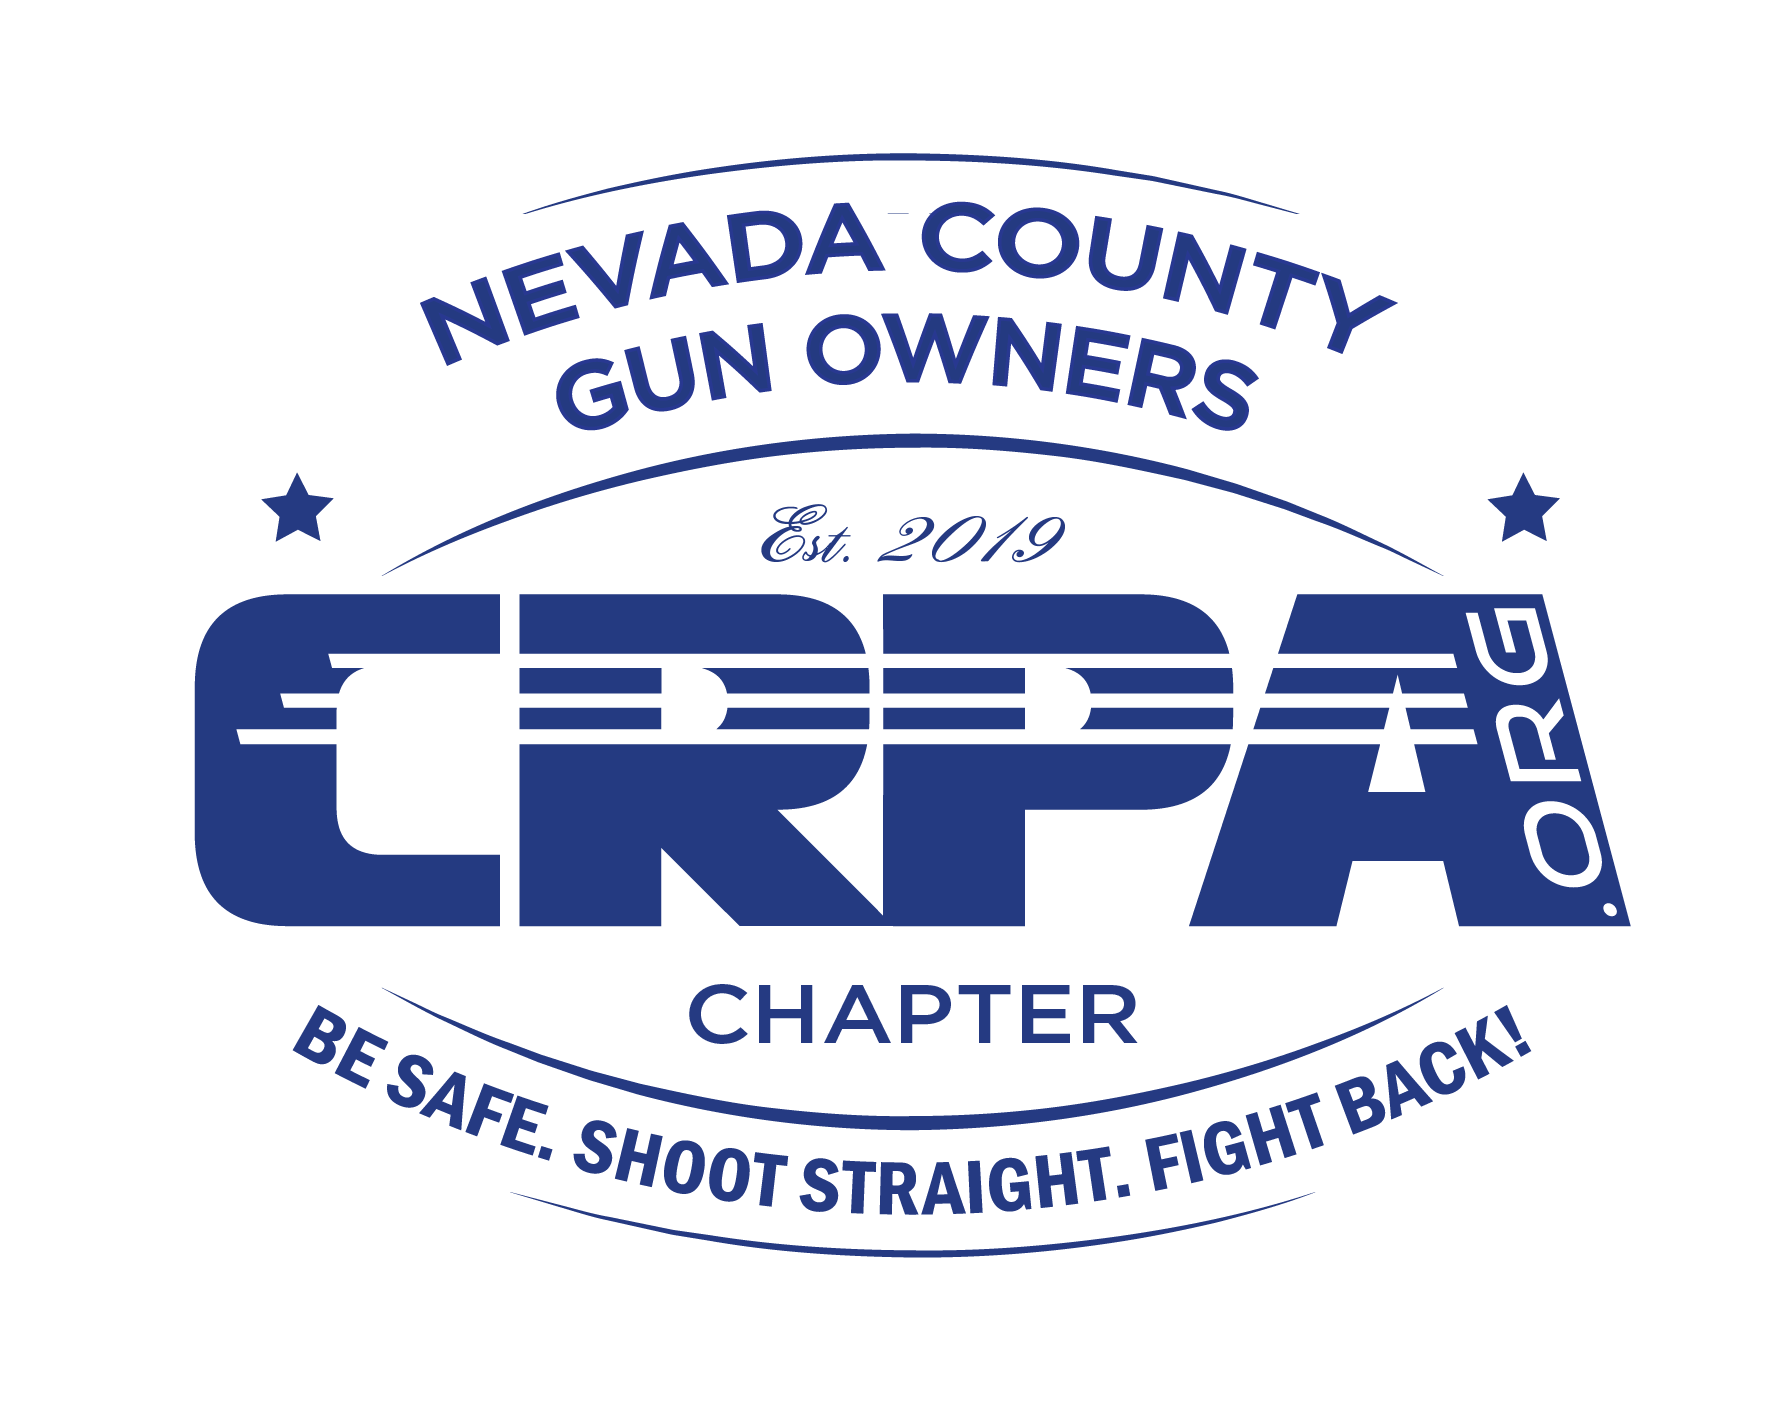 Nevada County Gun Owners: A CRPA Chapter